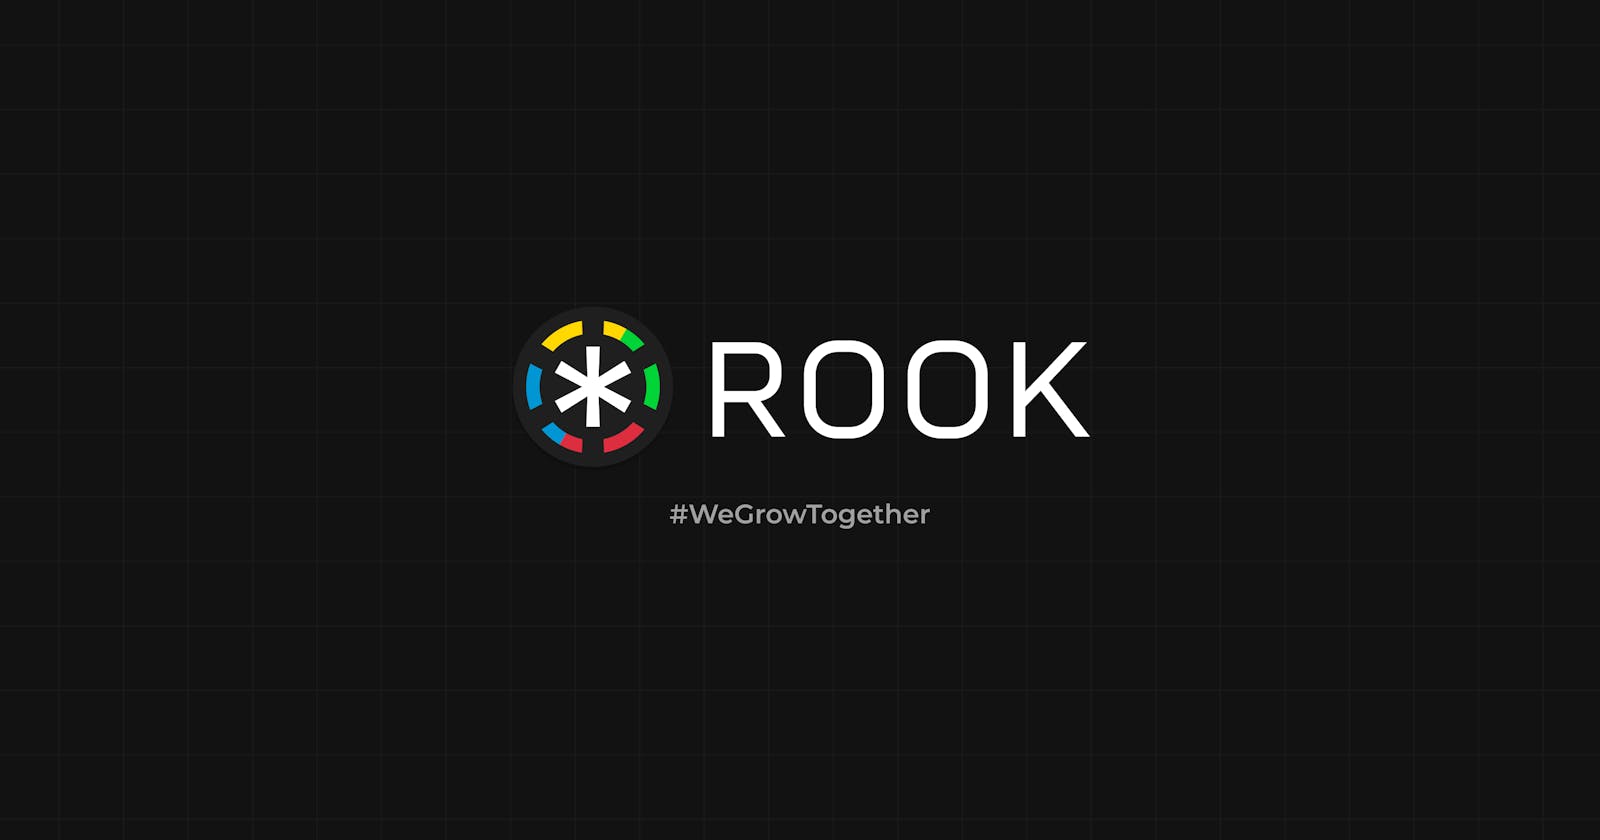 Cover Image for Uncovering the meaning behind the Rook Logo